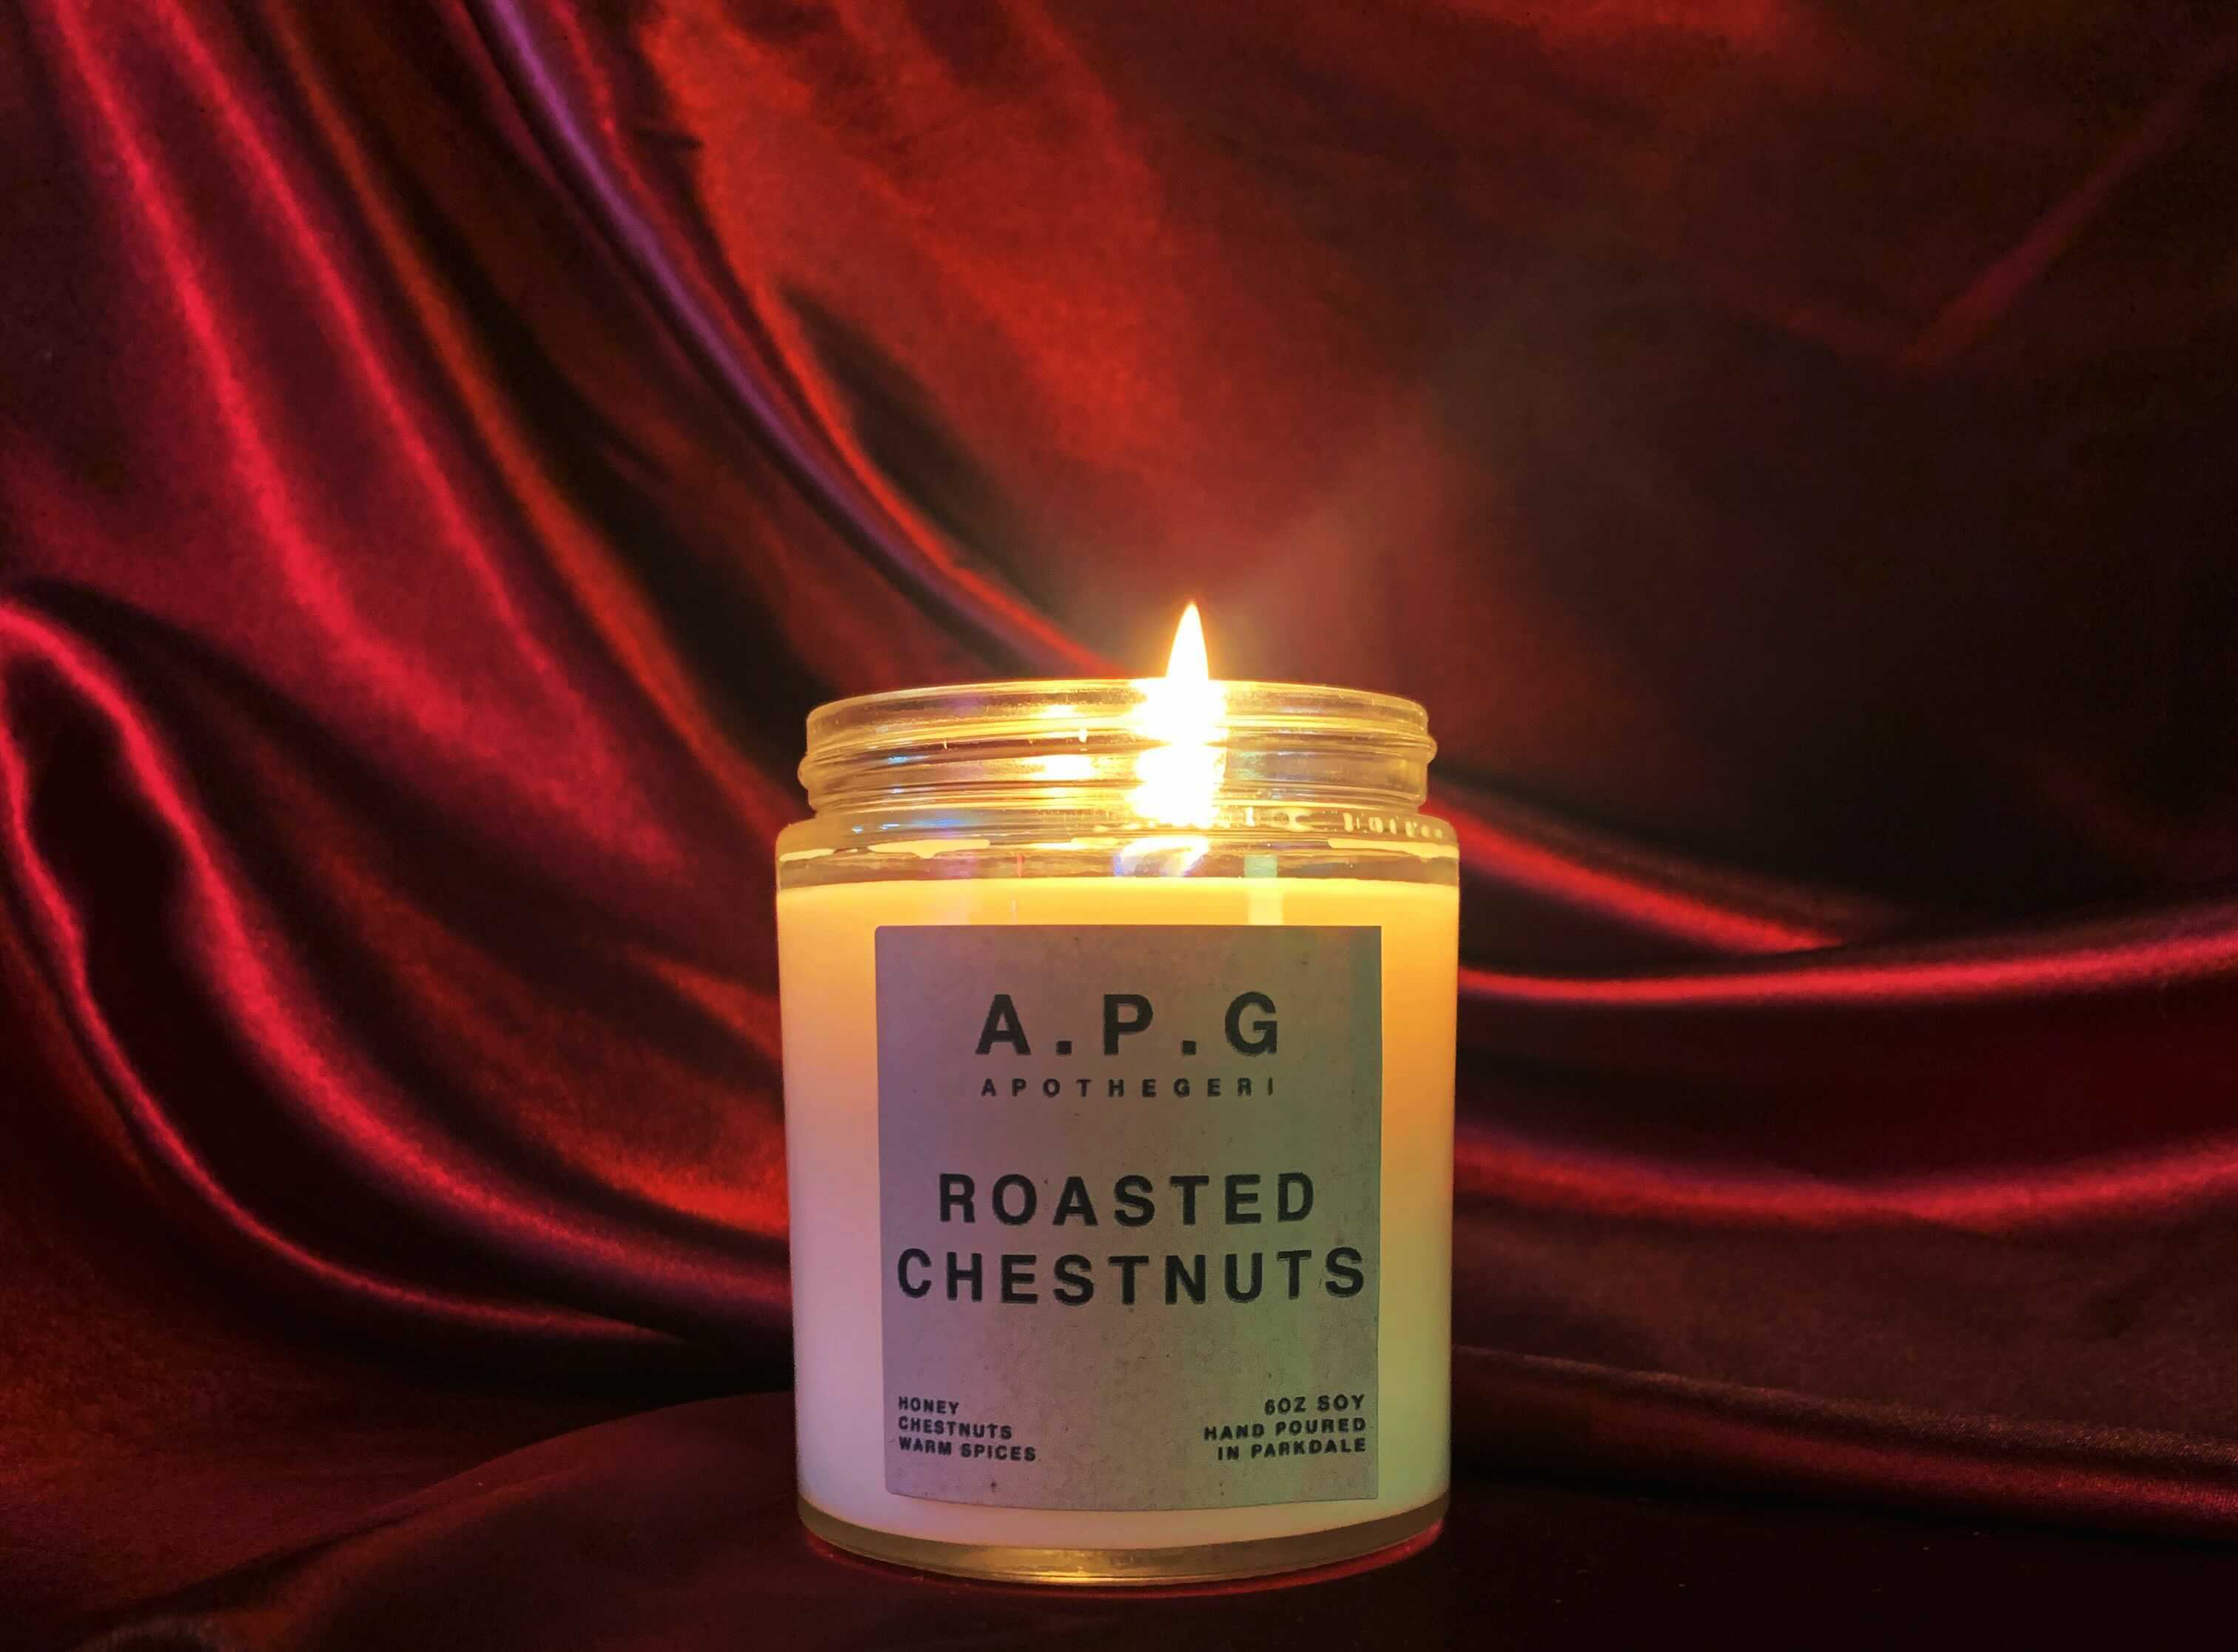 Roasted Chestnuts Soy Candle